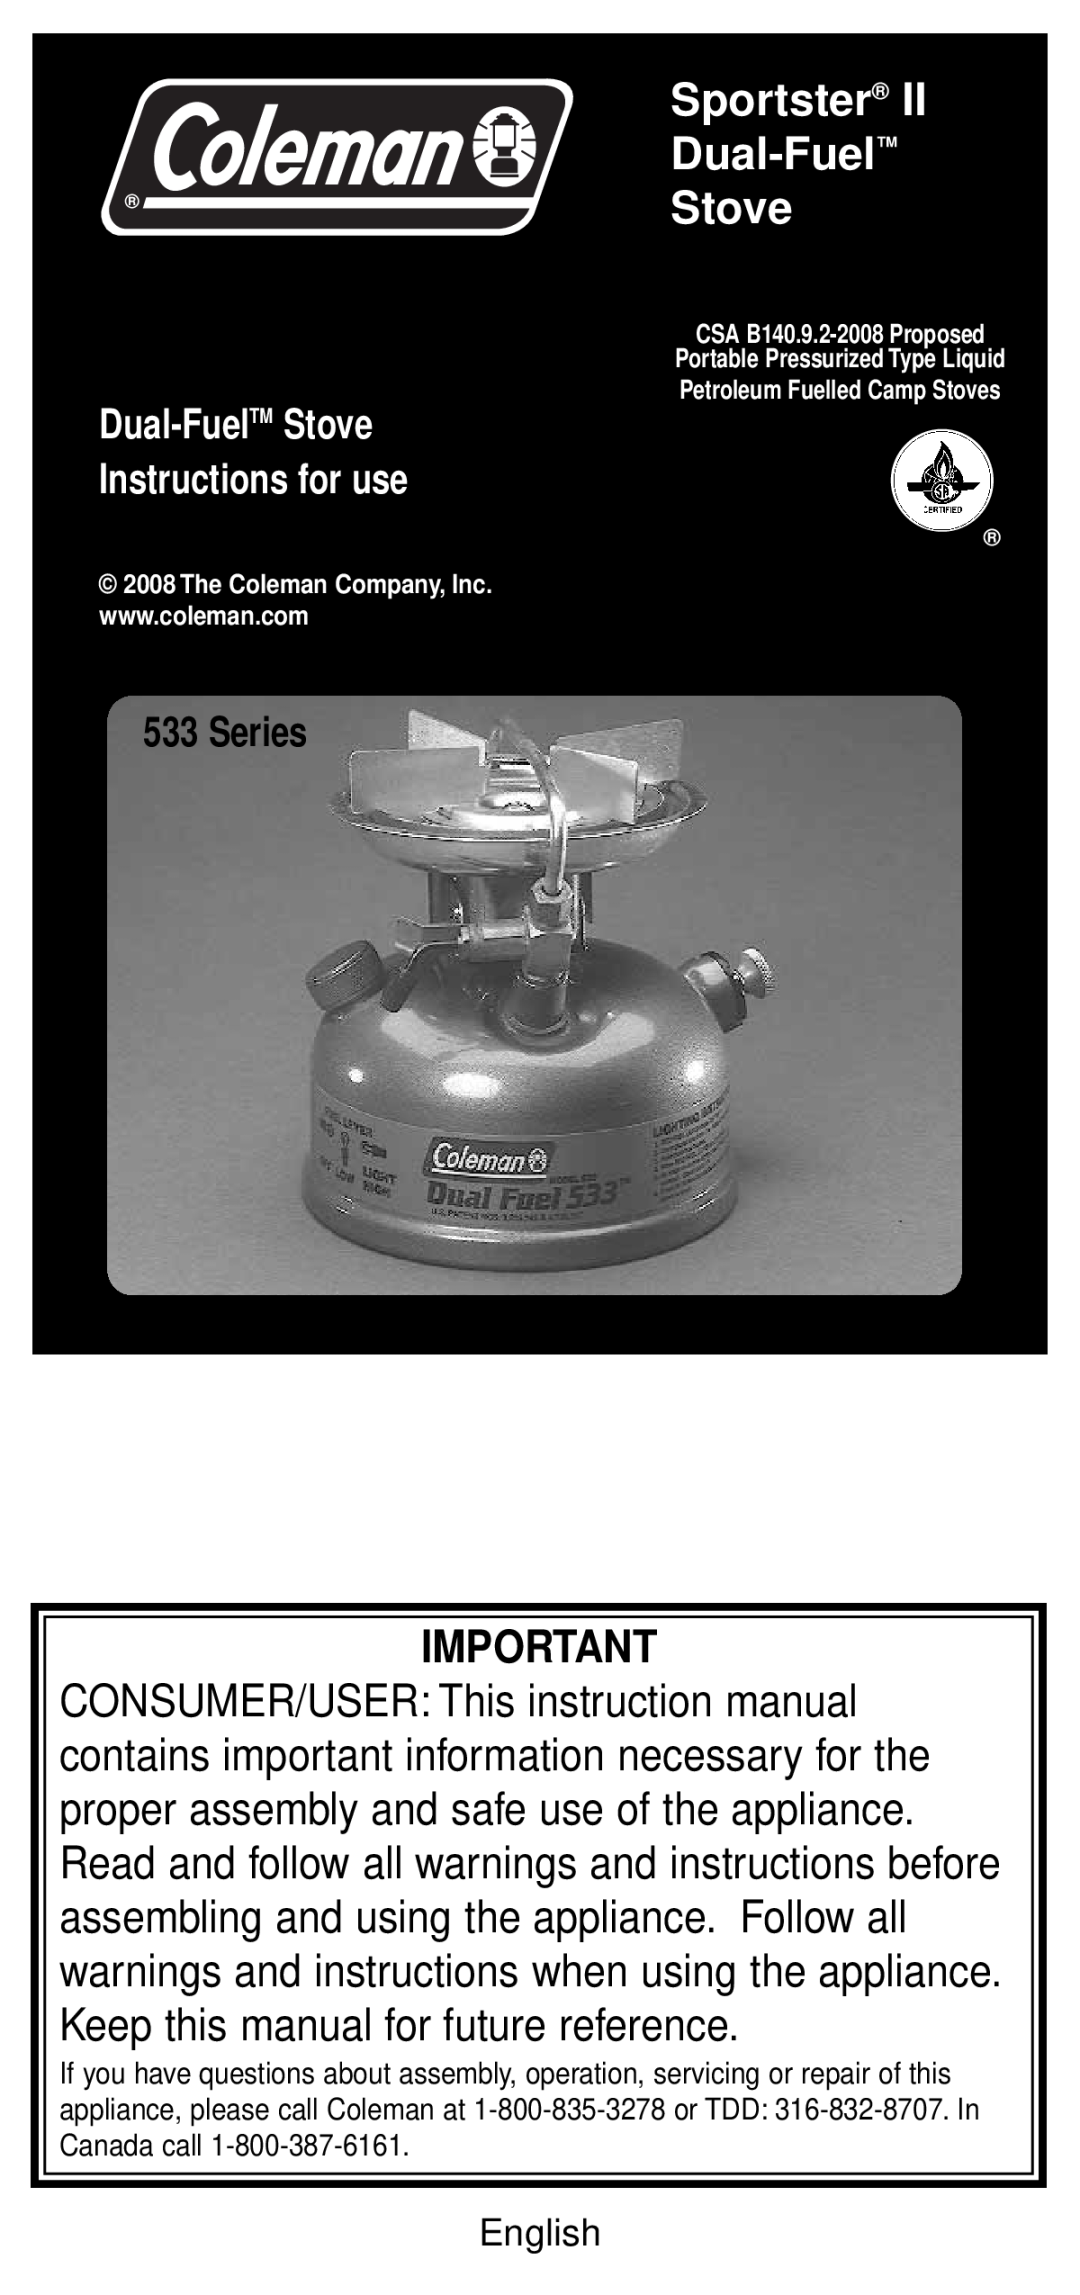 Coleman 533 Series instruction manual Sportster Dual-Fuel Stove, Dual-FuelTM Stove Instructions for use 